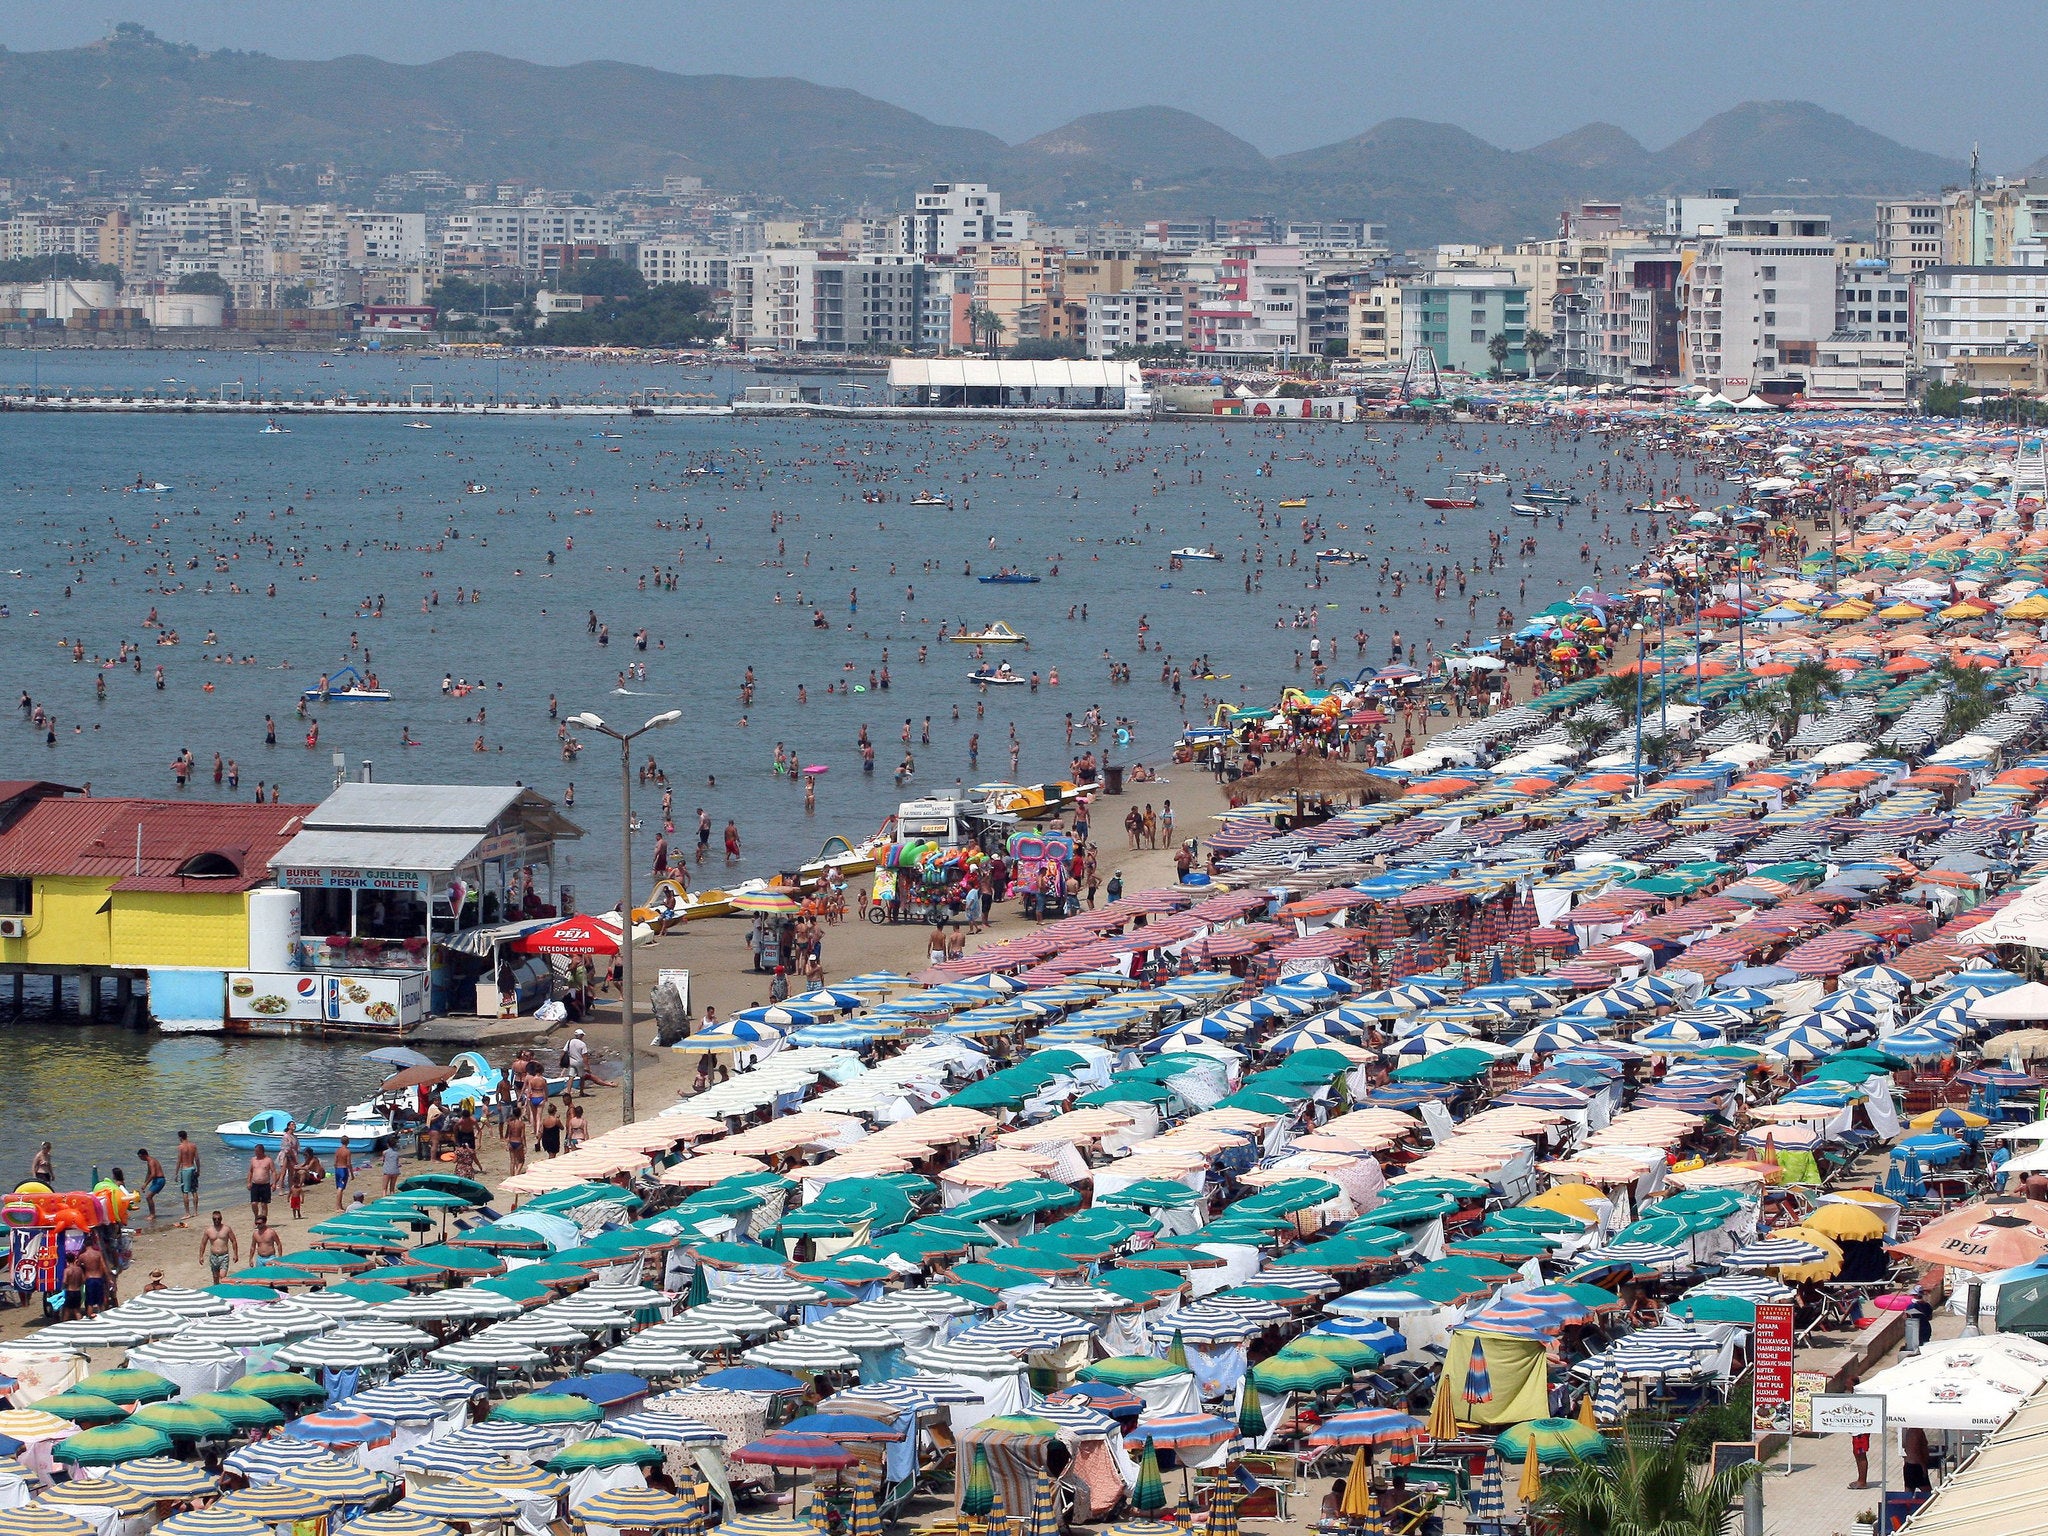 Across Europe, sizzling heat waves are hitting popular holiday destinations and tourist hotspots